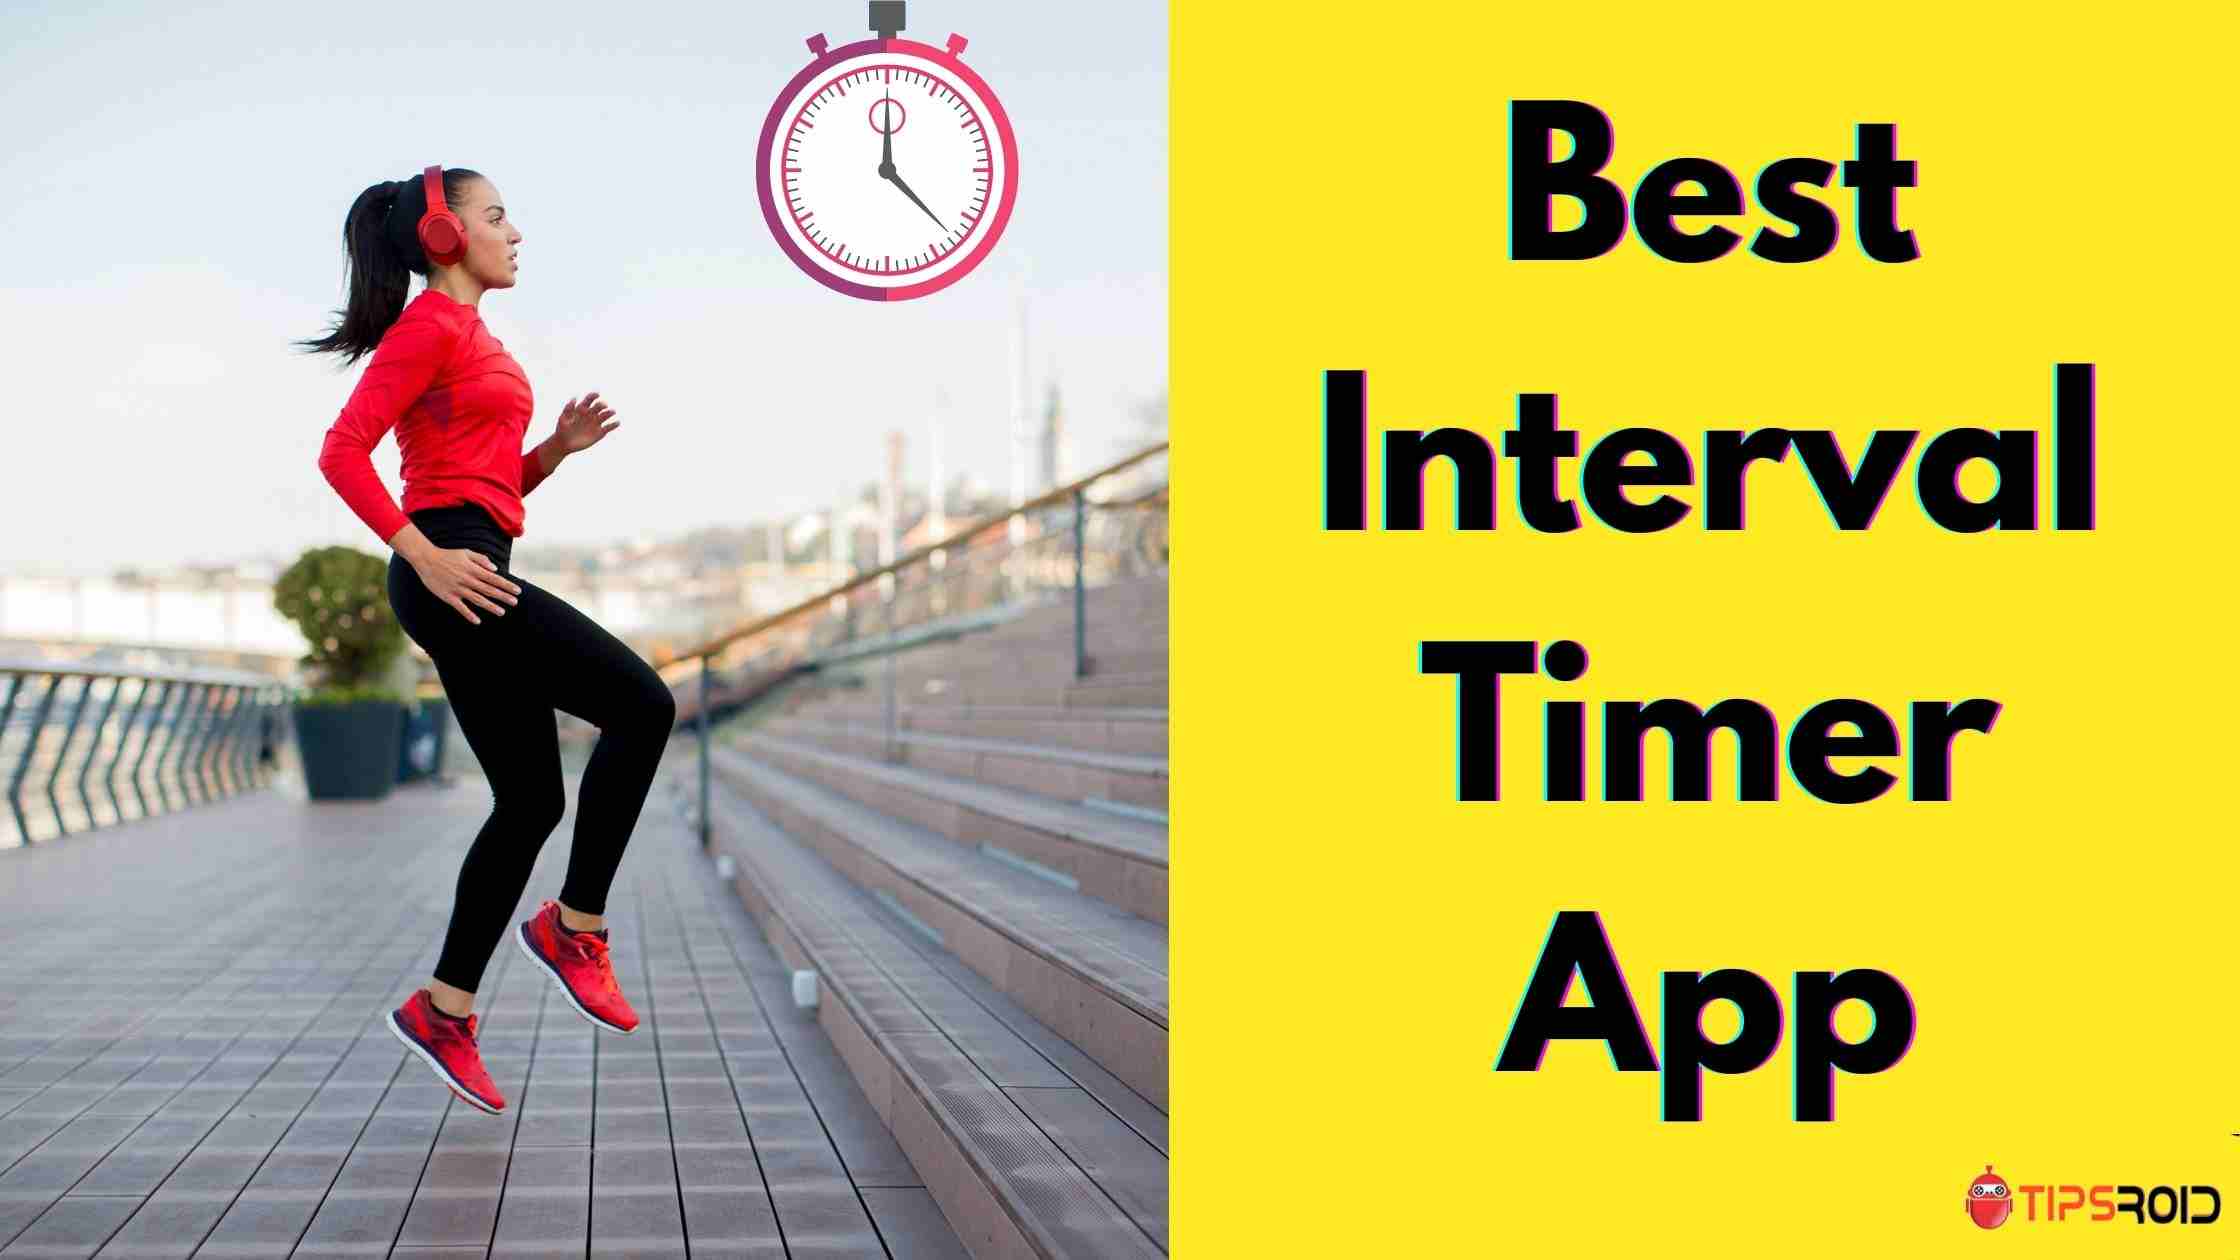 10 Best Interval Timer App For Android And iPhone